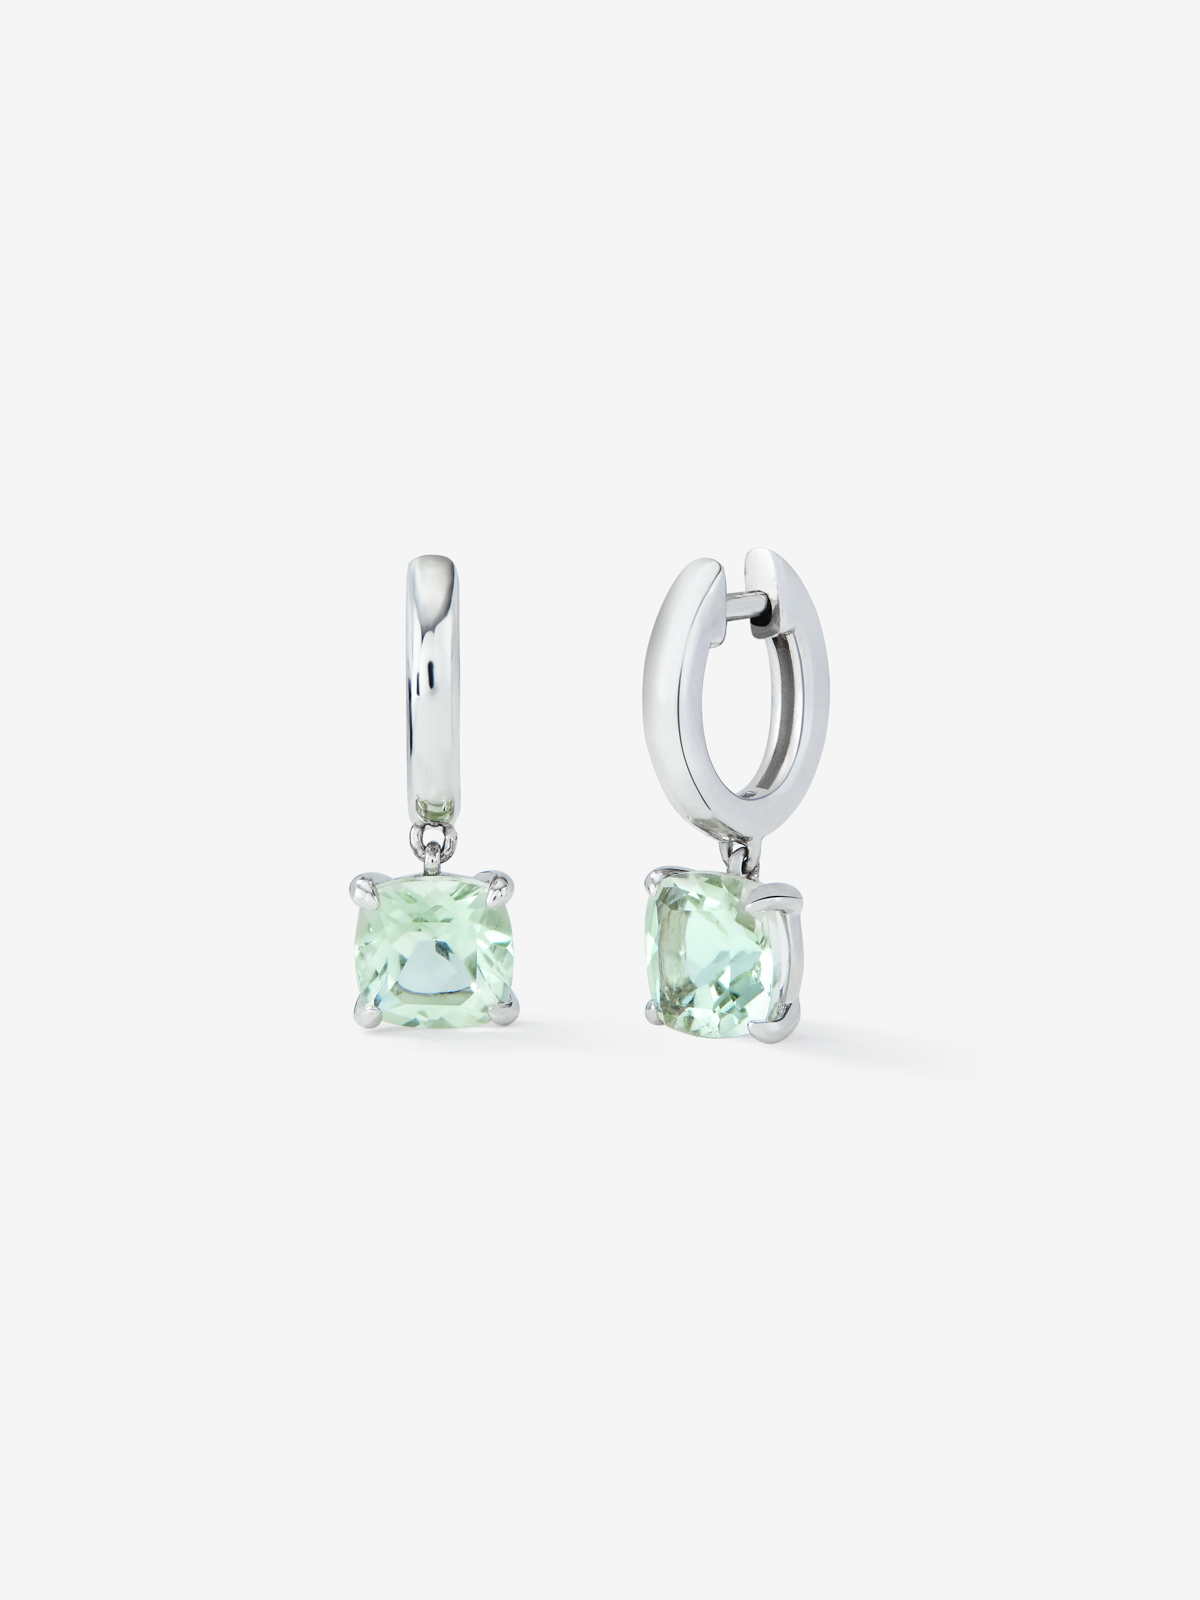 925 silver ring earrings with pendant green ameter